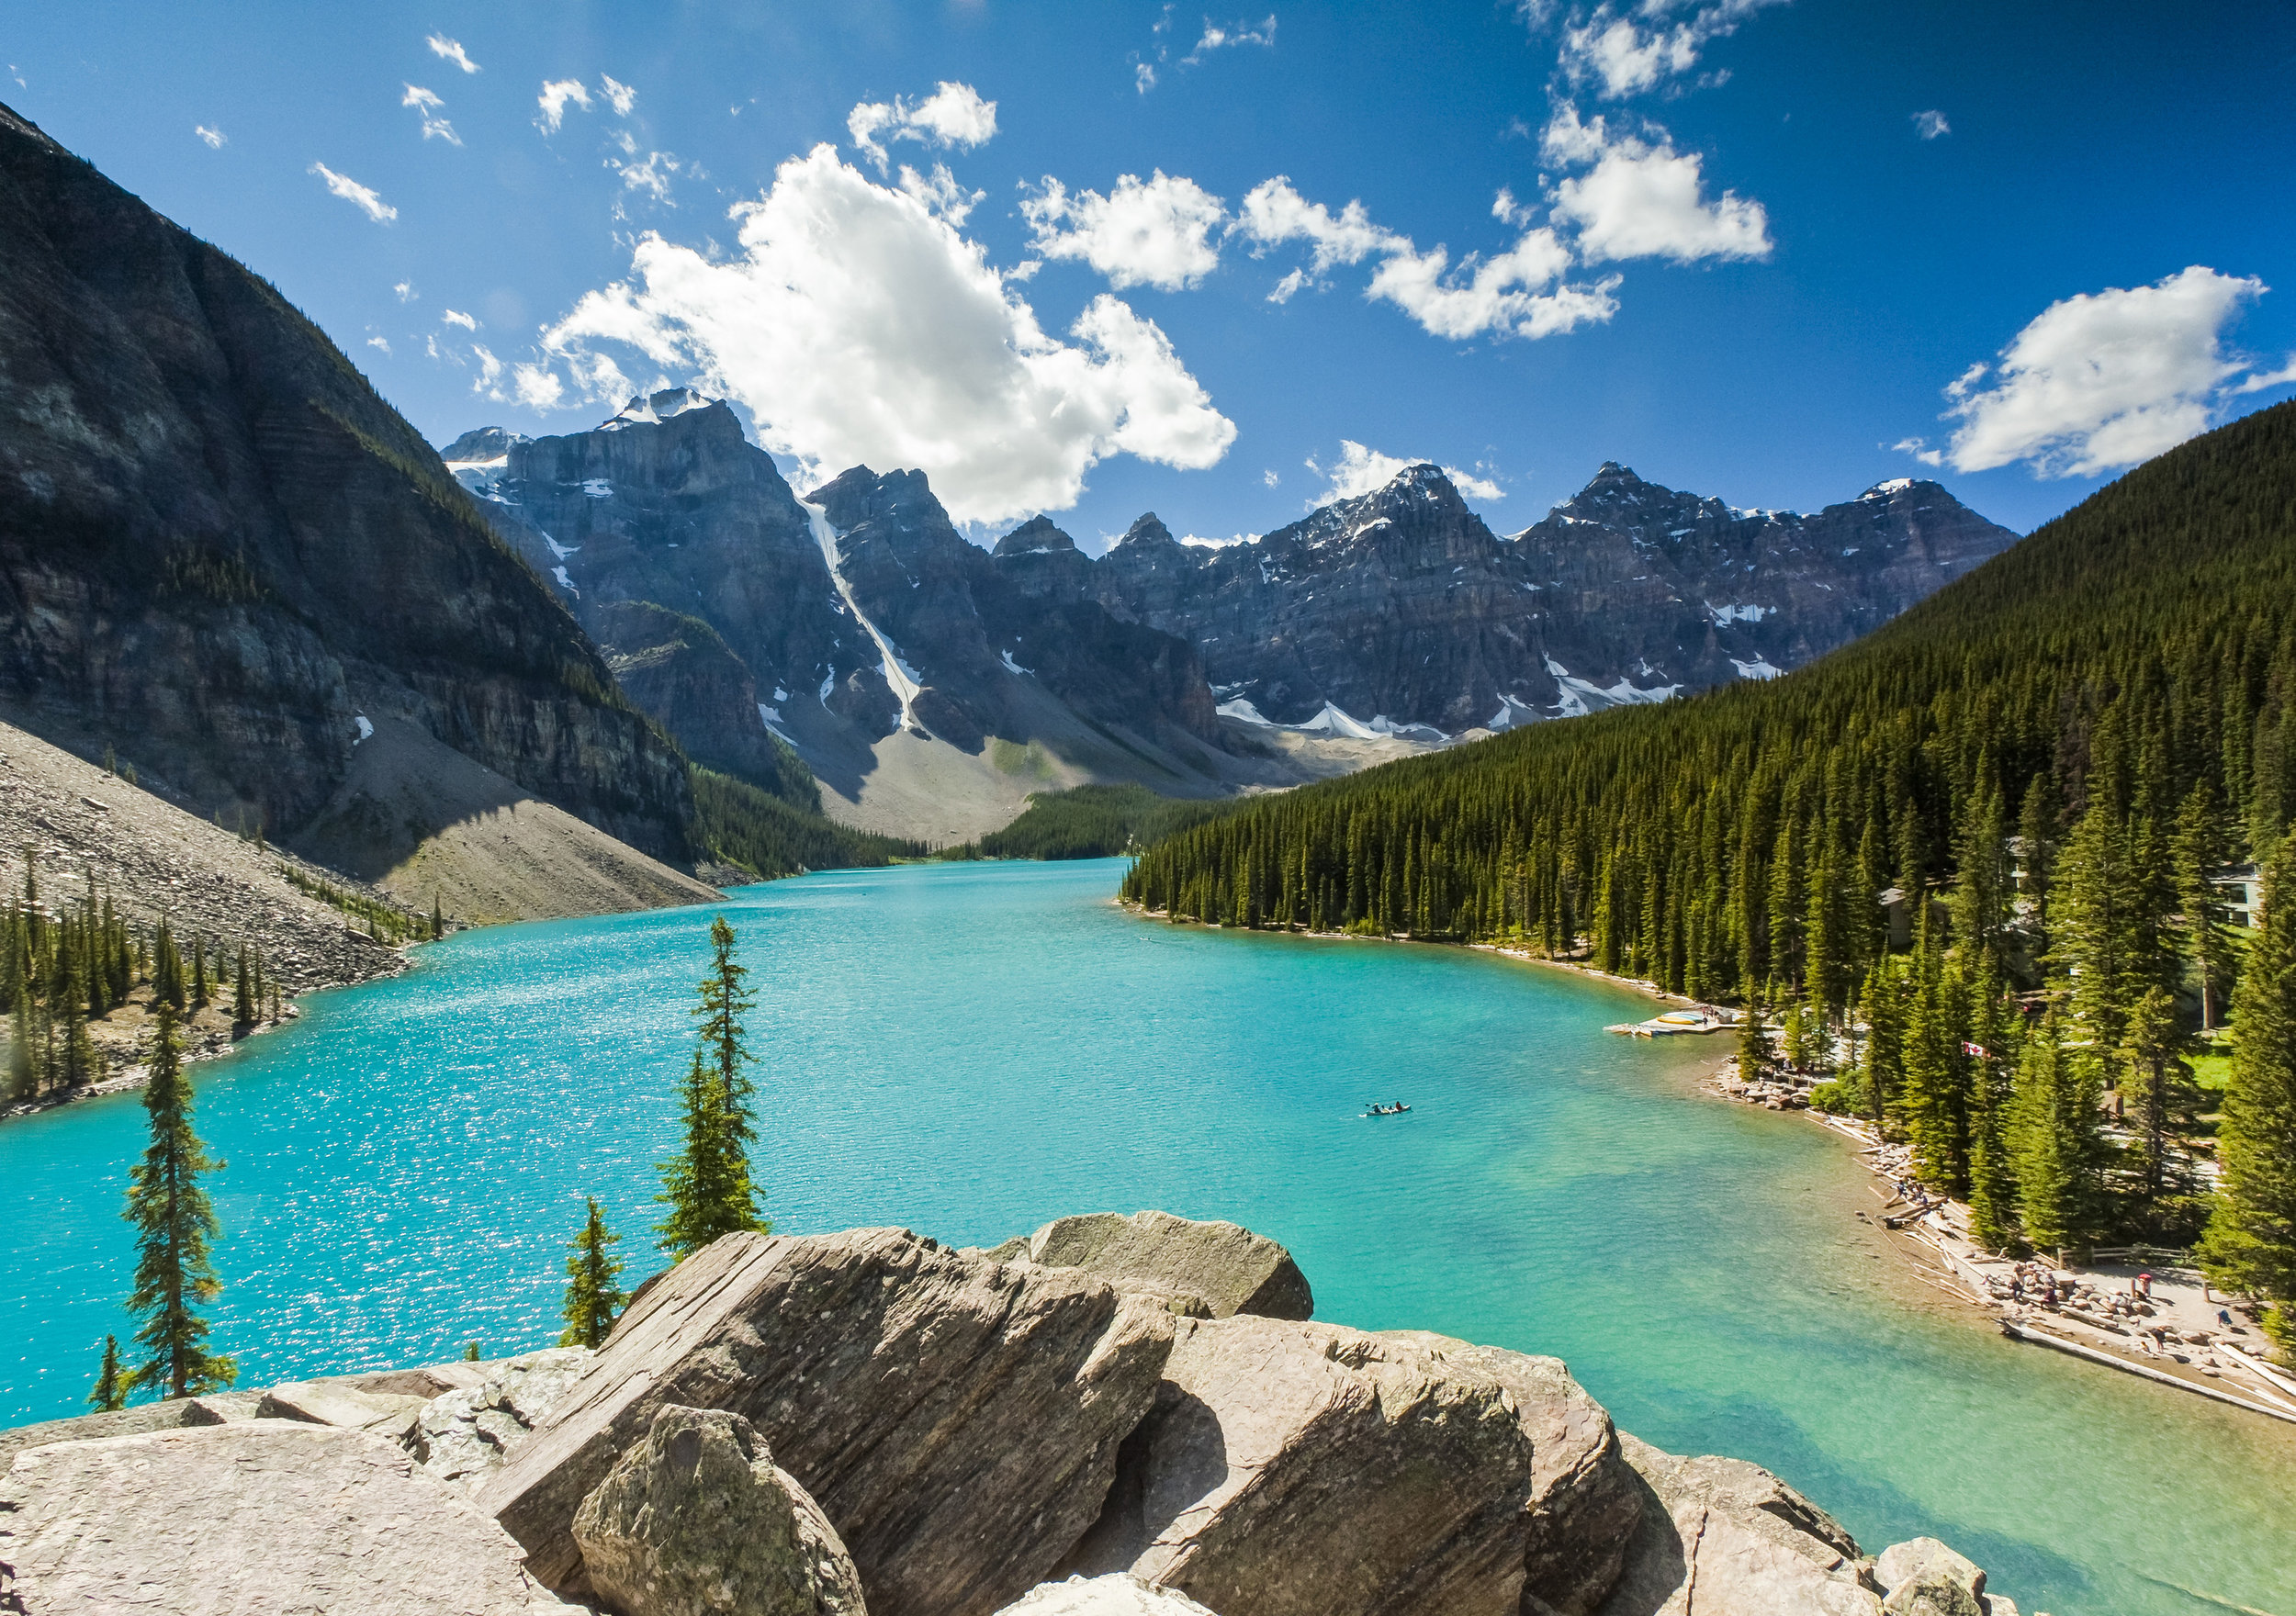 Guided hiking tours in the Rockies